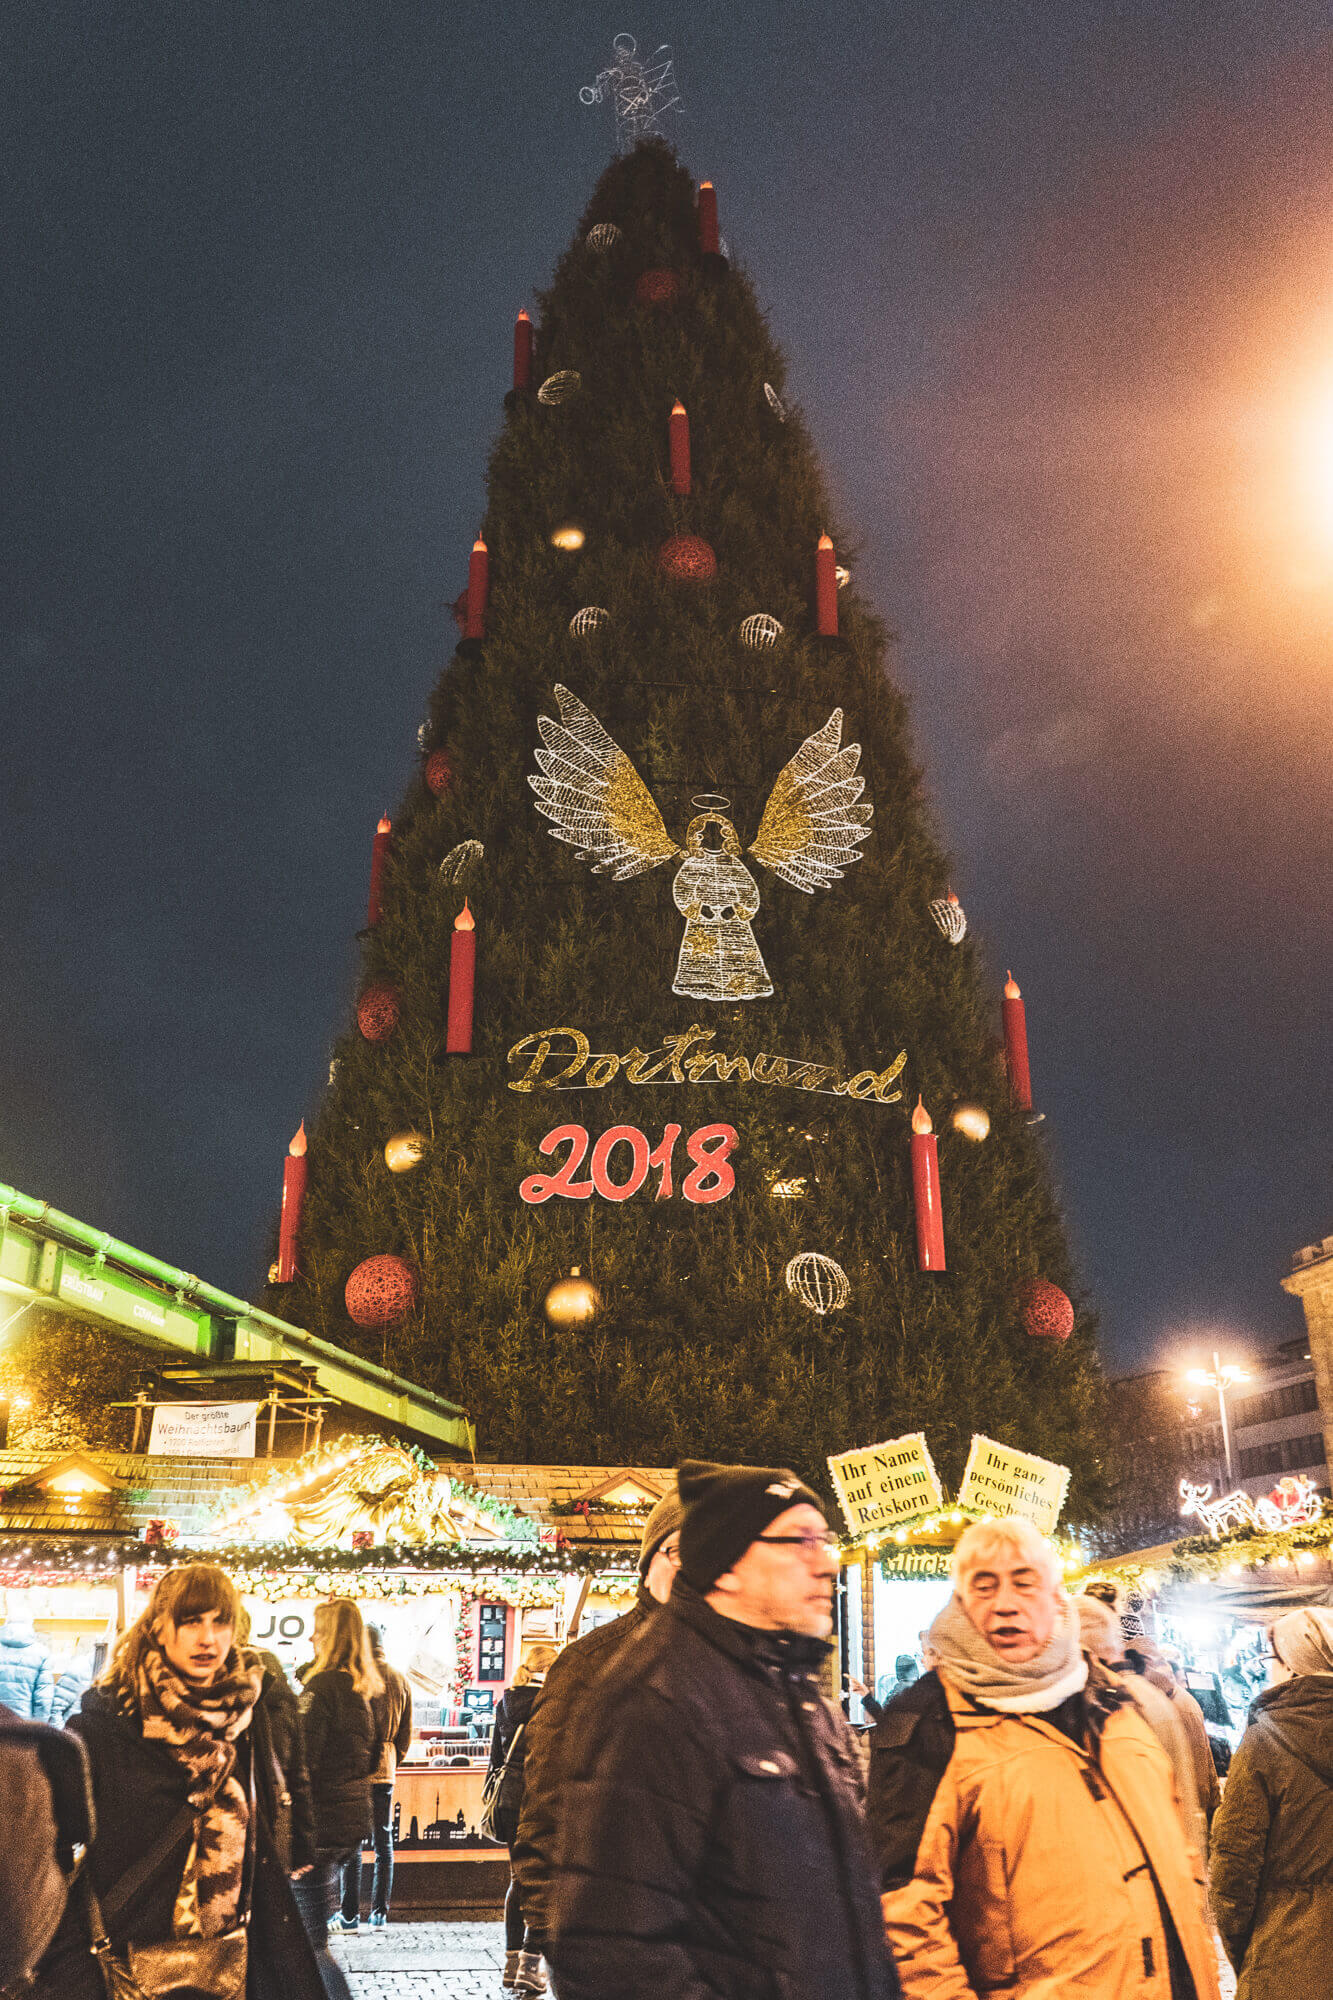 The largest Christmas tree in the world, at the Dortmund Christmas Market